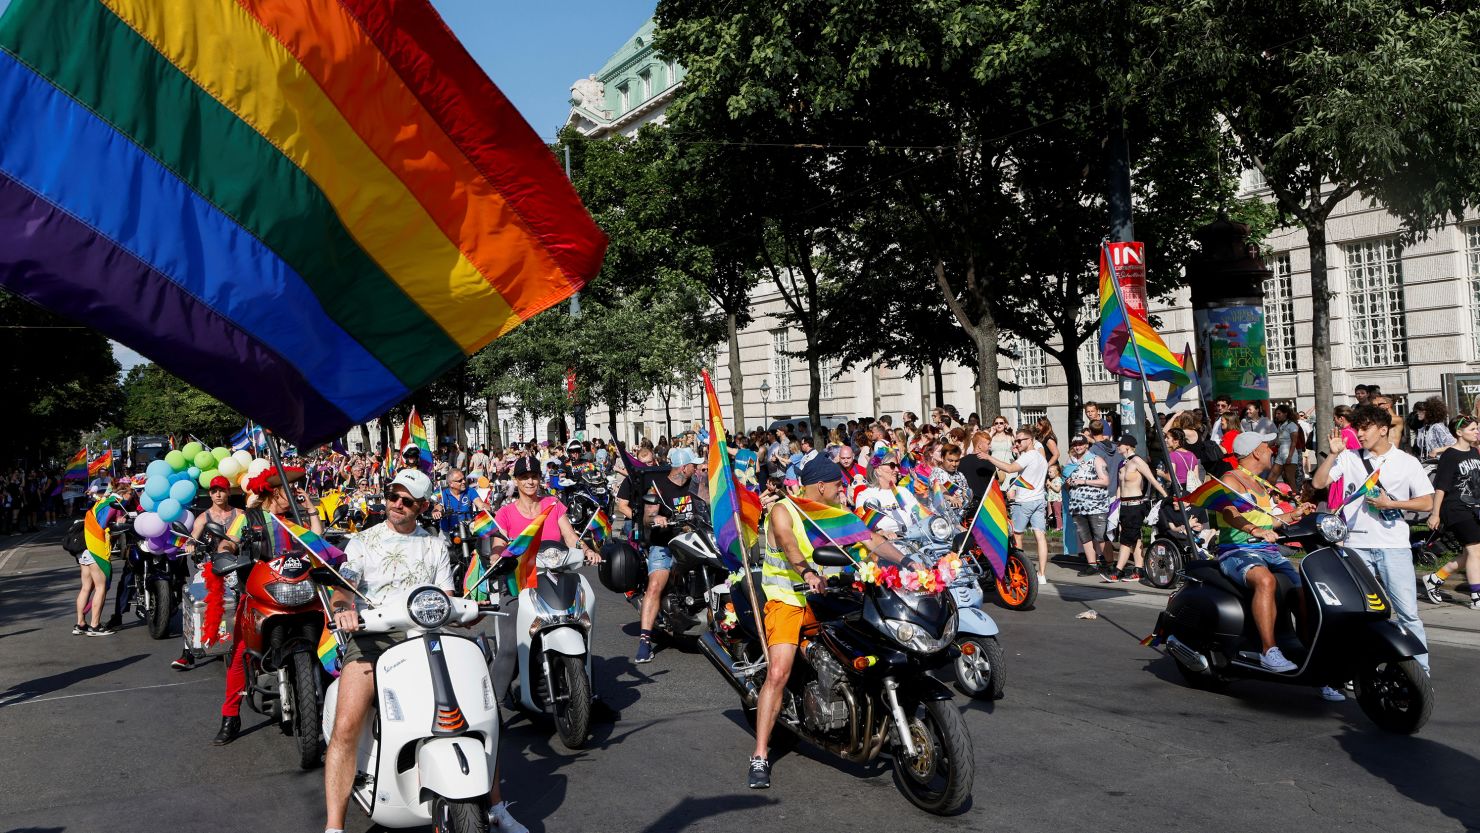 People ride motorbikes and scooters during a march to celebrate LGBTQ+ rights at the annual pride parade in Vienna, Austria, June 17, 2023.